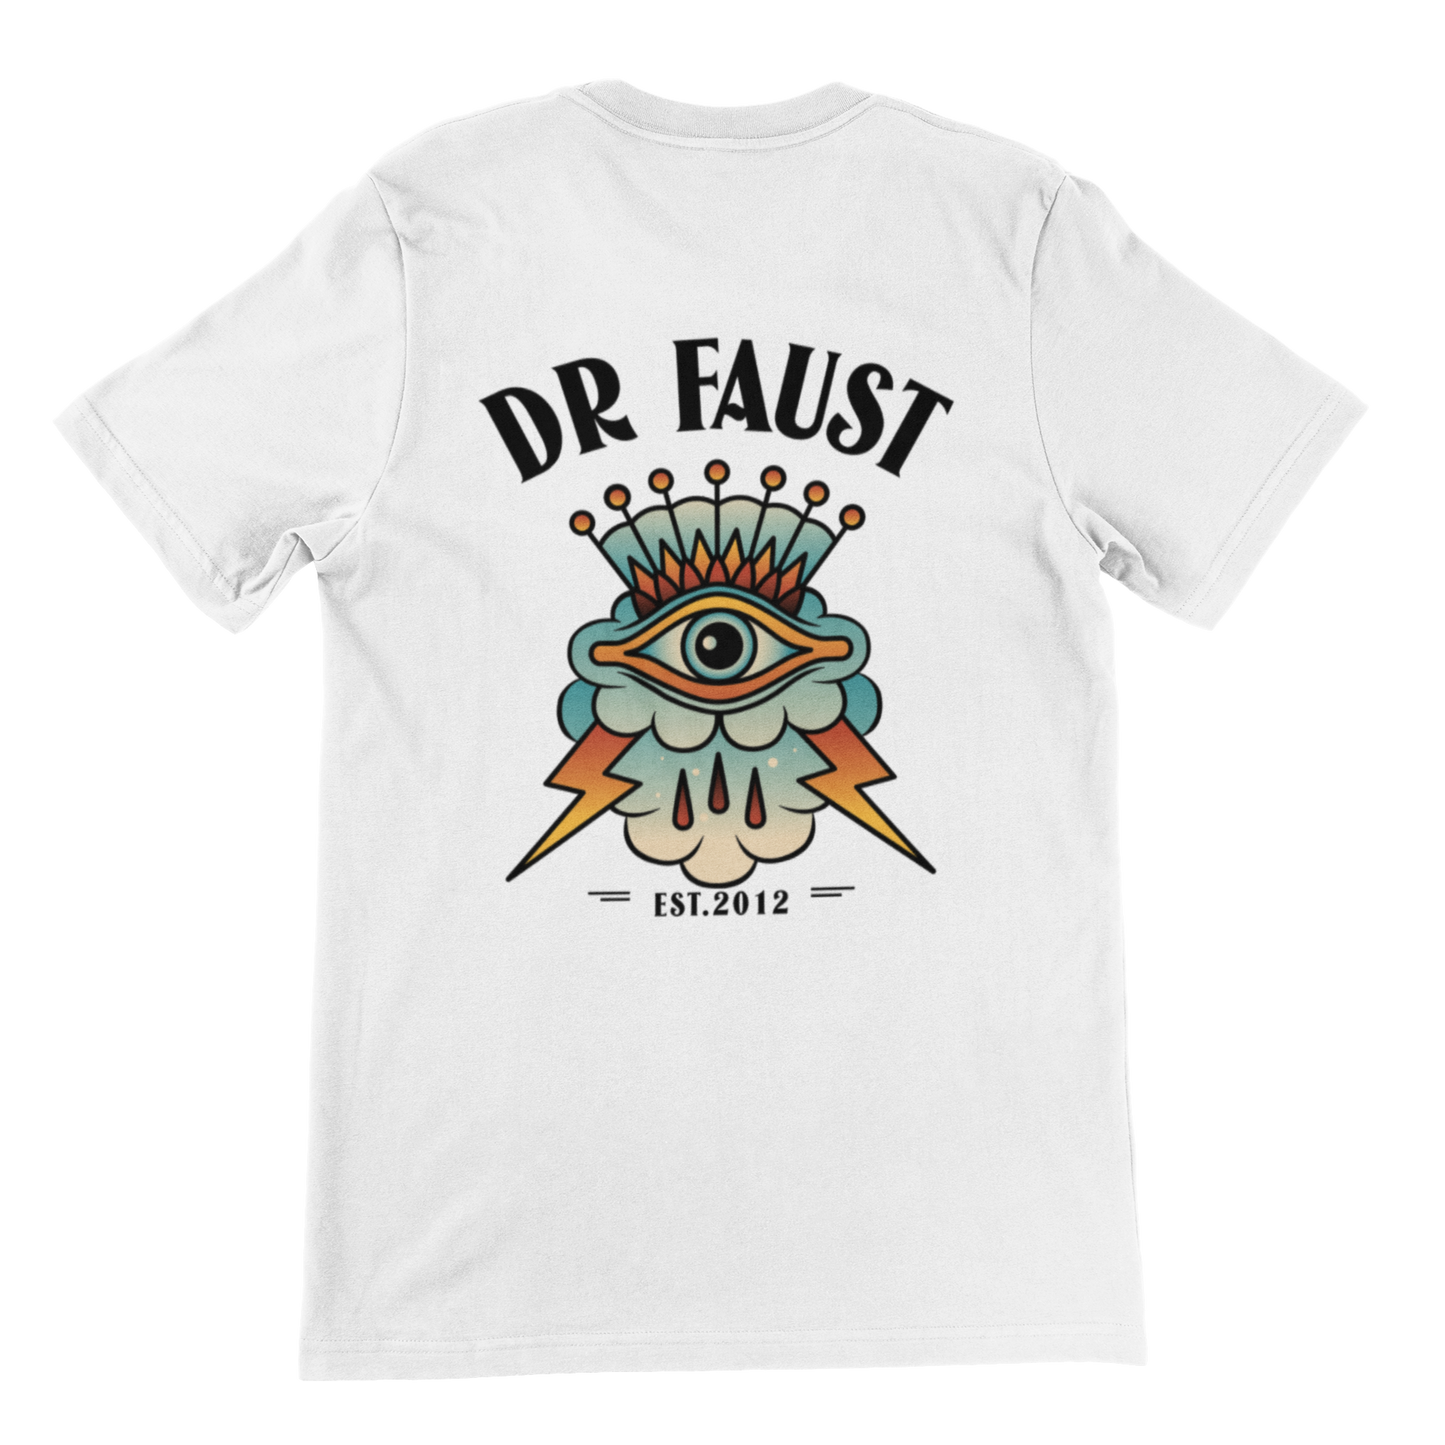 Dr Faust Tears of heaven White T-shirt.